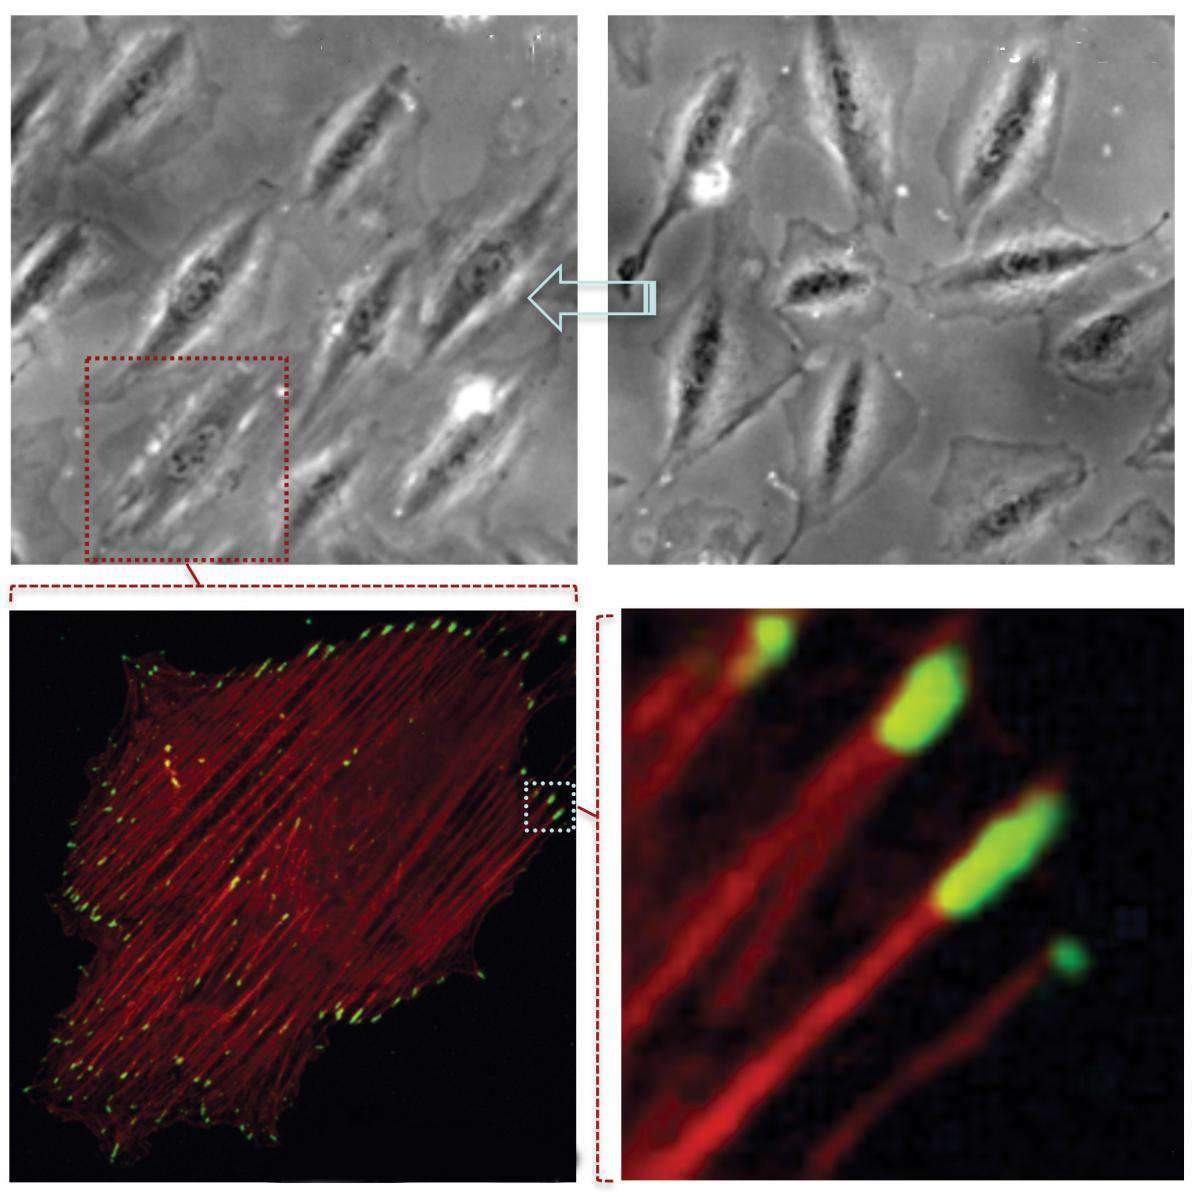 Top right: Before force is applied, cells grown in culture are randomly oriented. Top left: As a result of cyclic stretching, the cells organize in a uniform orientation. Bottom left: Following the cyclic stretching, cell skeletal fibers (“compressed springs,” red) align at the same angle as the cell body. Bottom right: Focal adhesions (green) at the ends of cellular skeleton fibers (red)